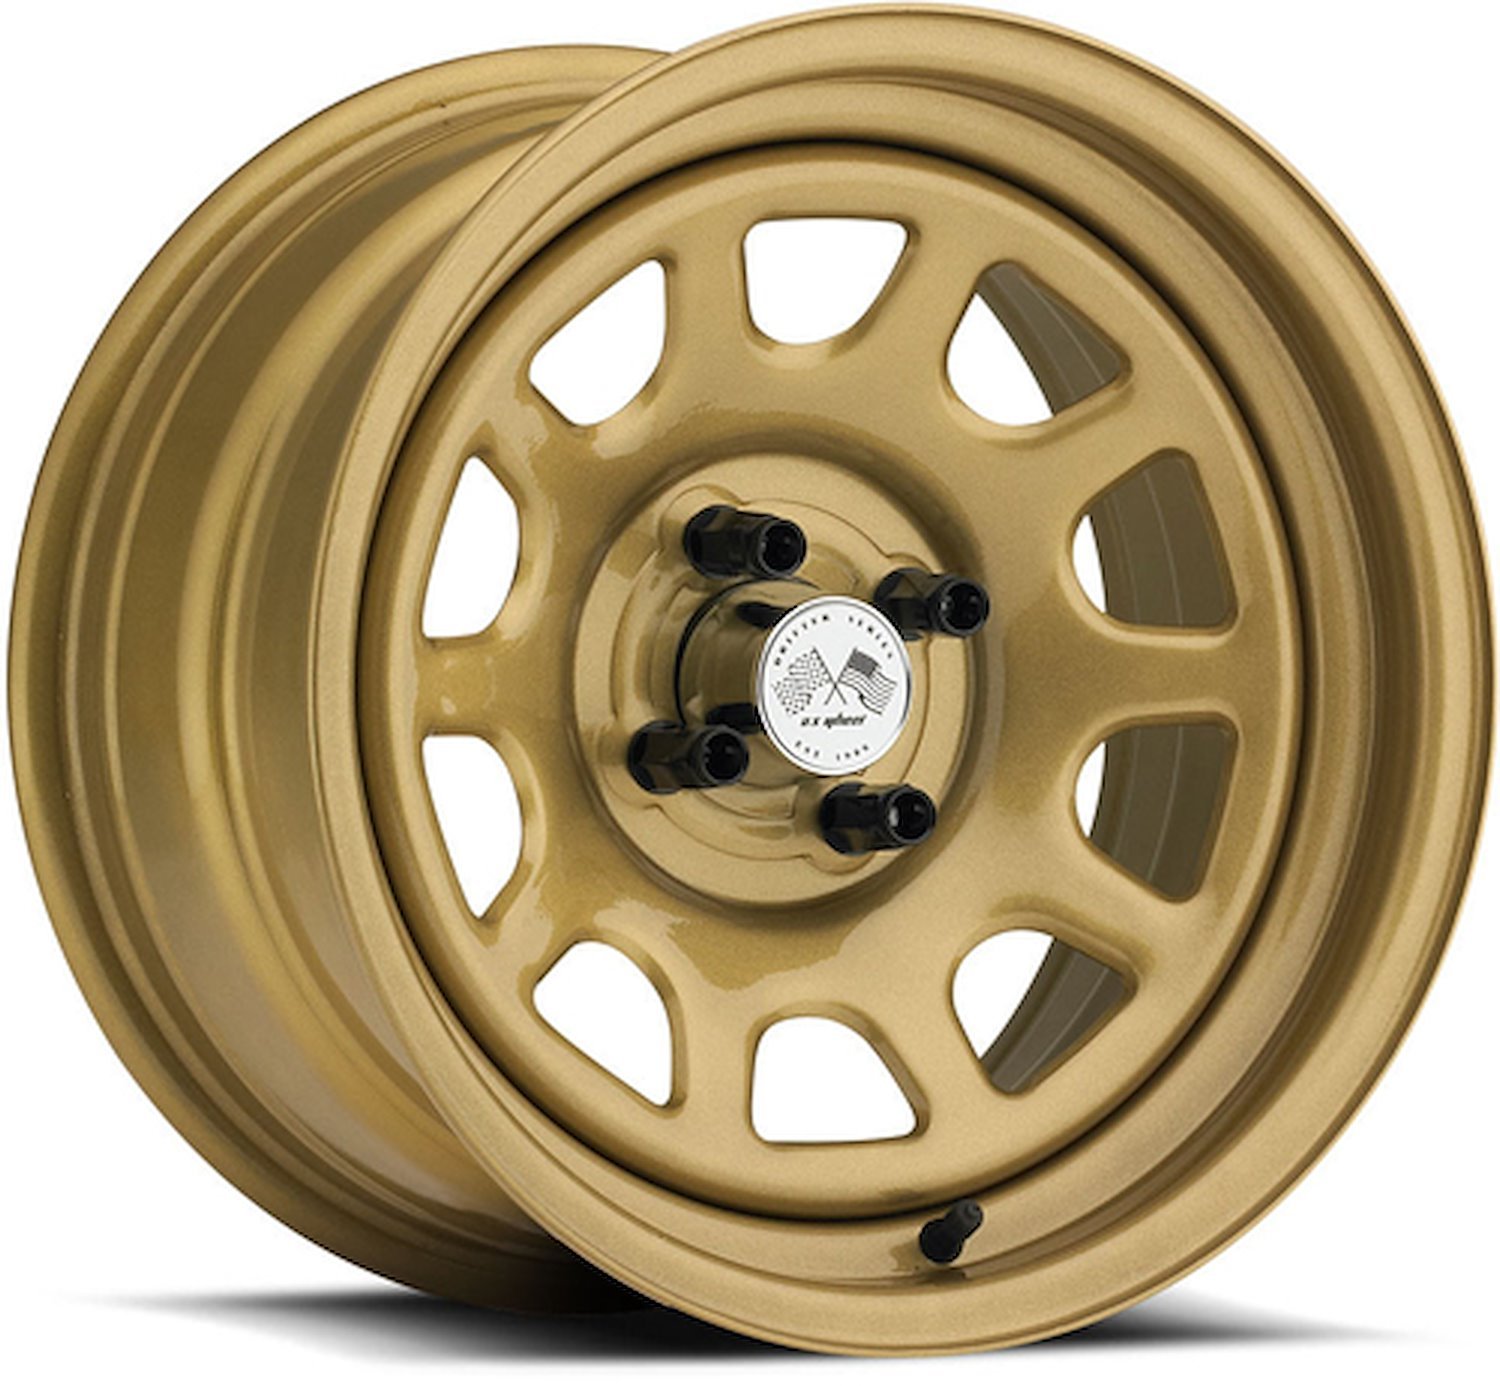 PAINTED DAYTONA FWD DRIFTER GOLD 15 x 8 4 x 100 Bolt Circle 45 Back Spacing 0 offset 266 Center Bore 1400 lbs Load Rating